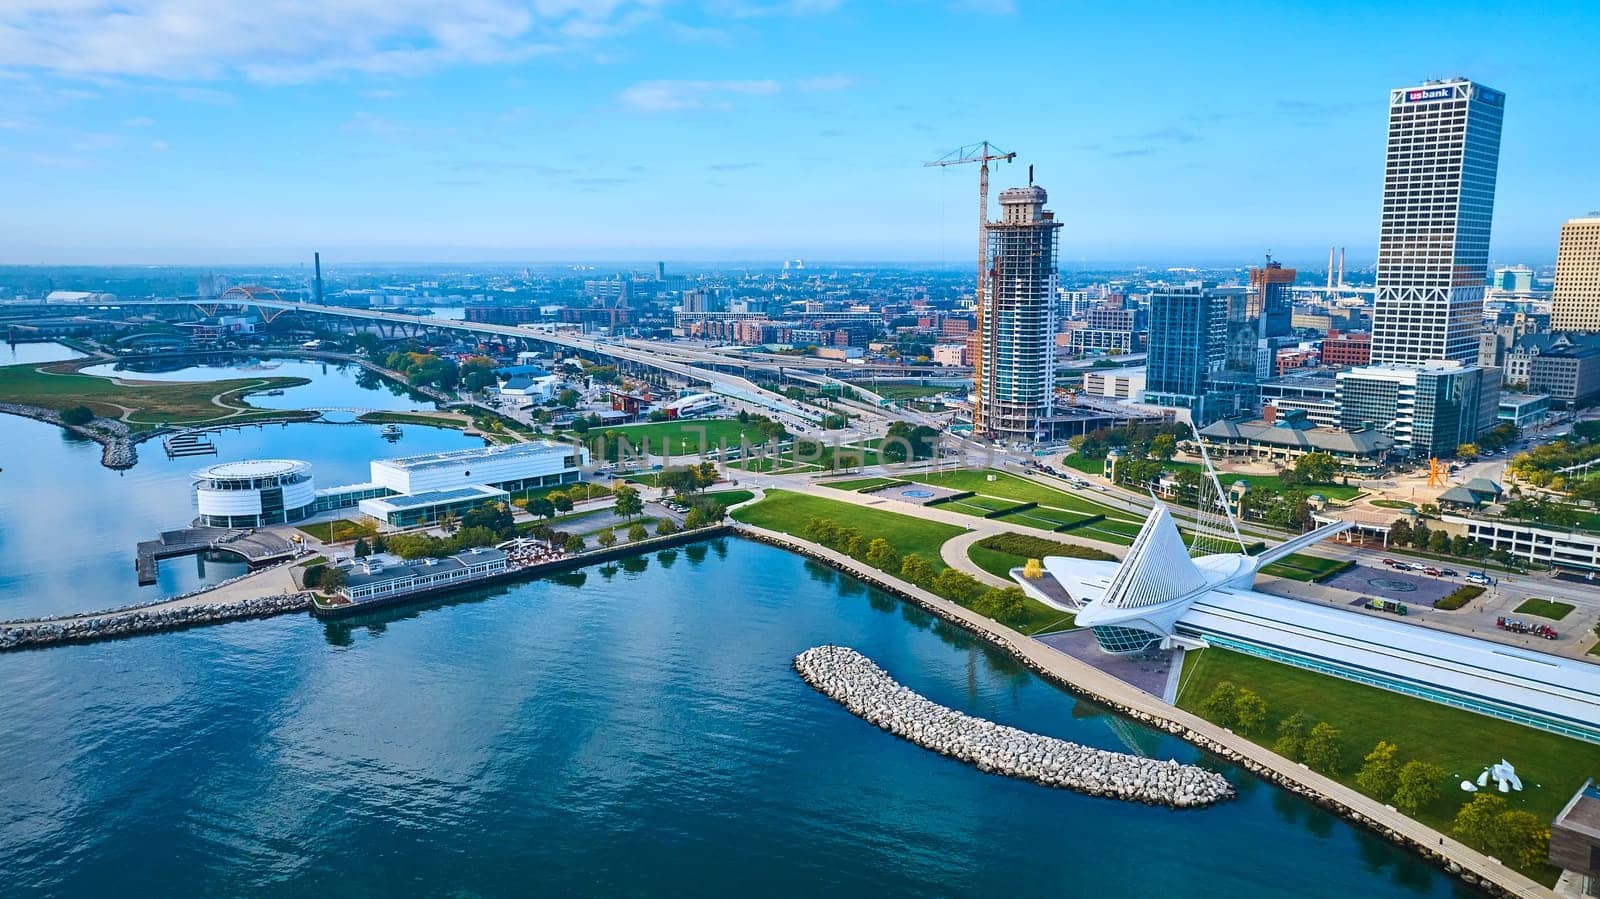 Aerial view of Milwaukee's vibrant waterfront cityscape featuring a modern suspension bridge, the glassy Quadracci Pavilion and a rising skyscraper under construction, depicting urban growth and harmony with nature.